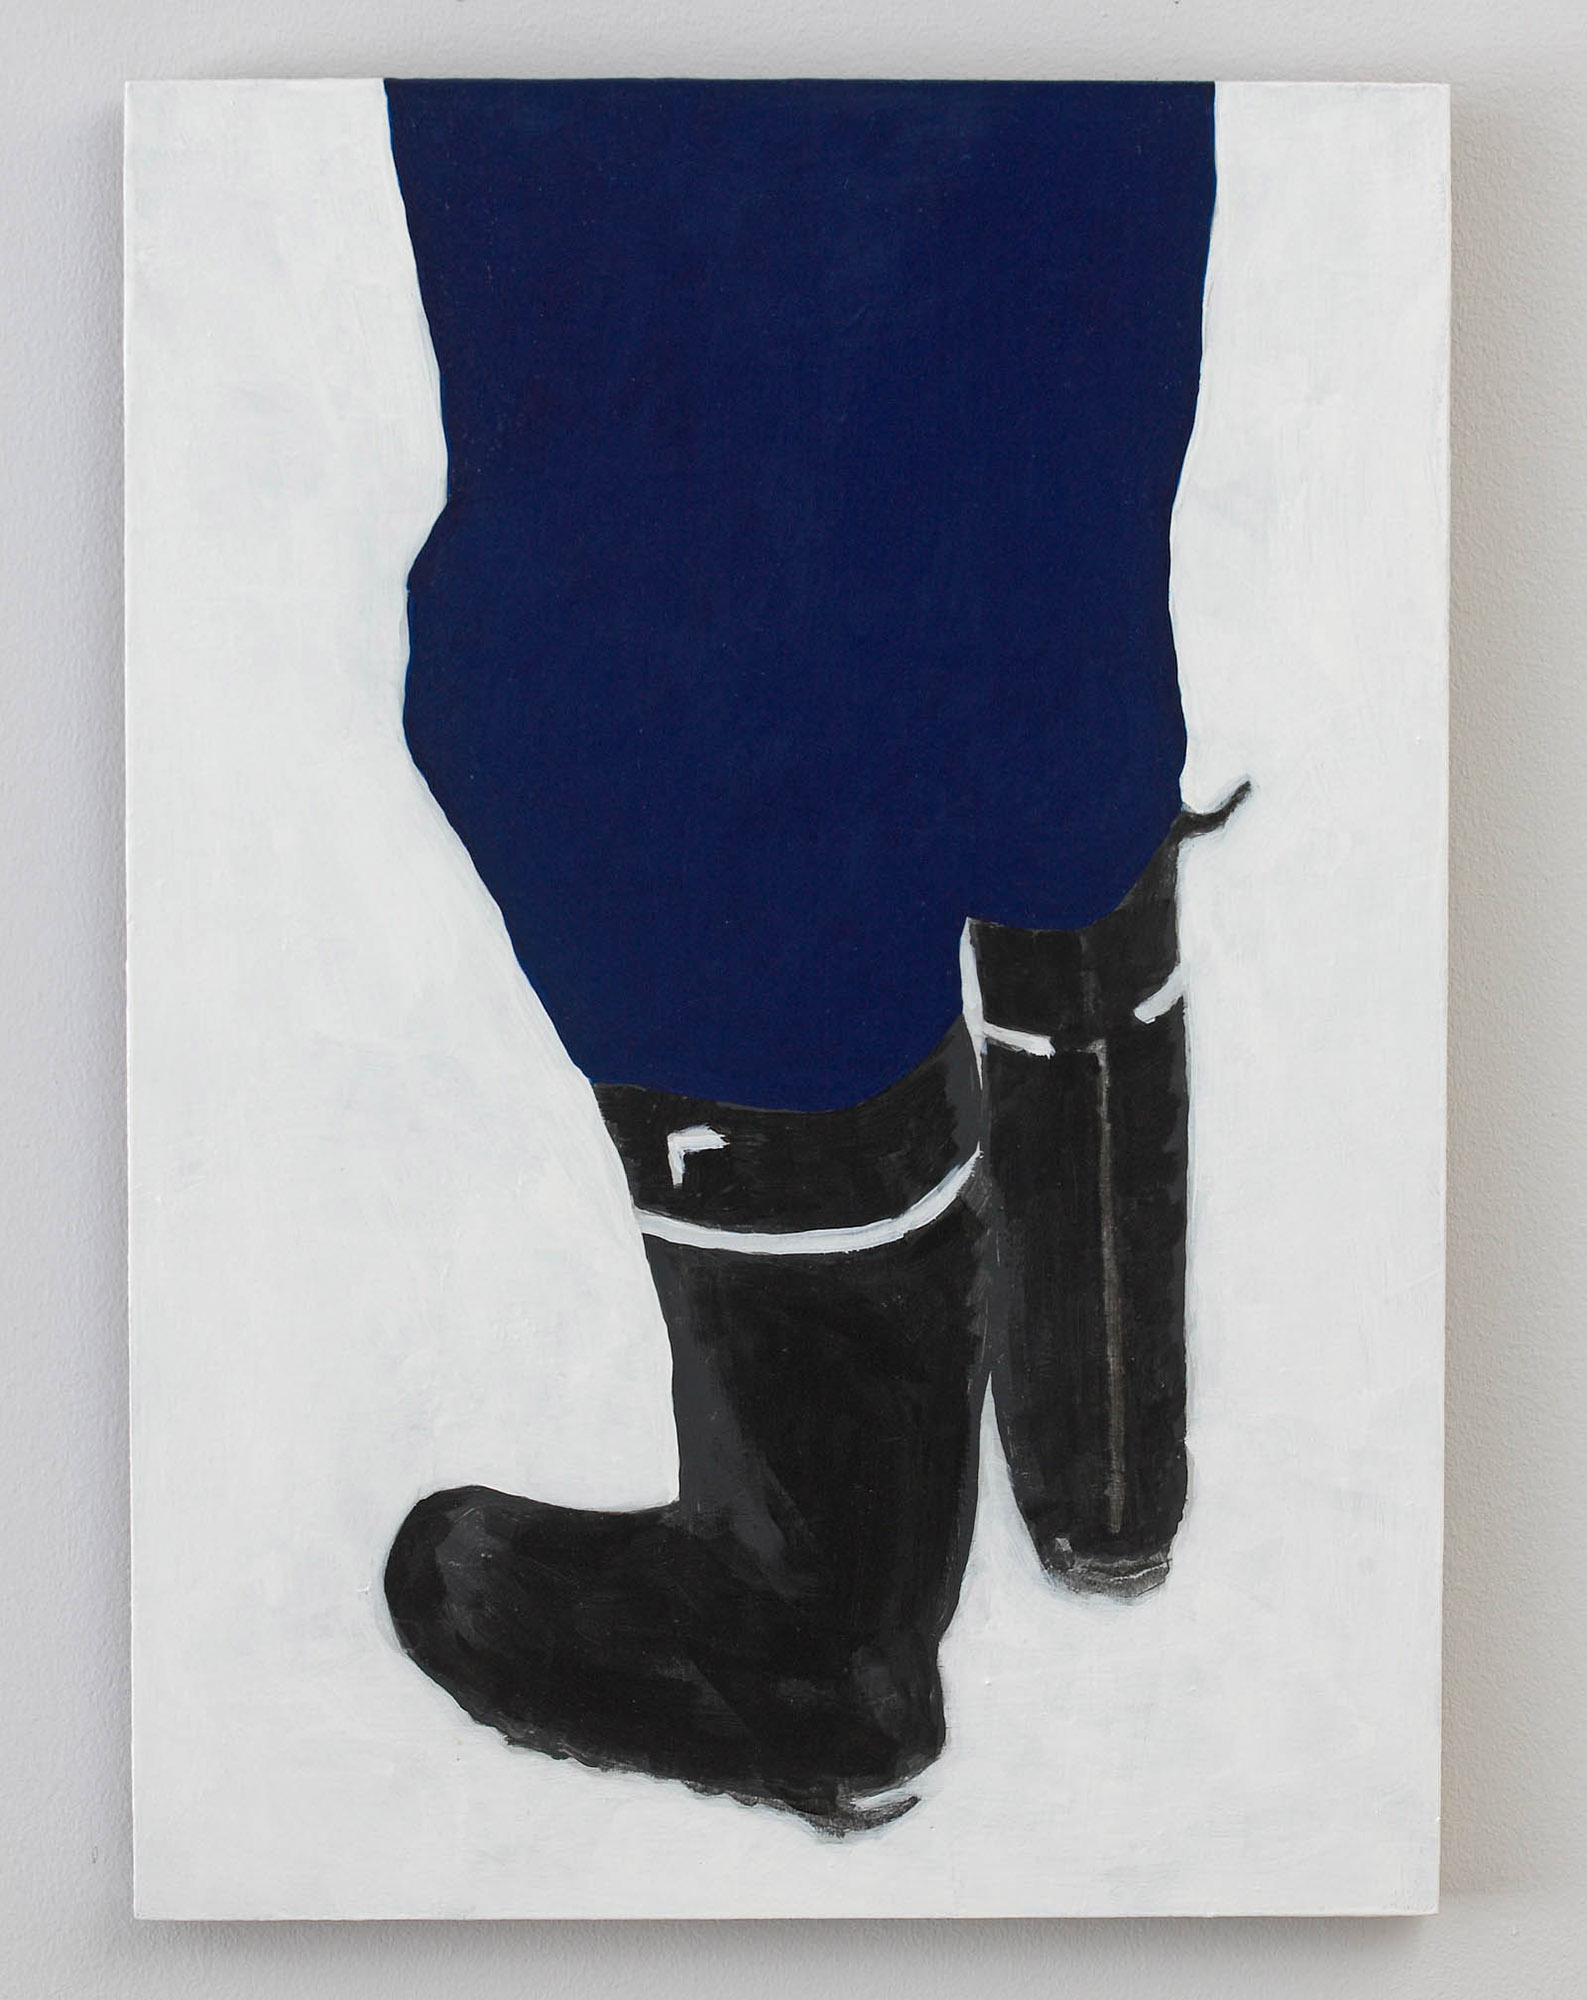 Painting on person with blue trousers and black boots, on a white background.